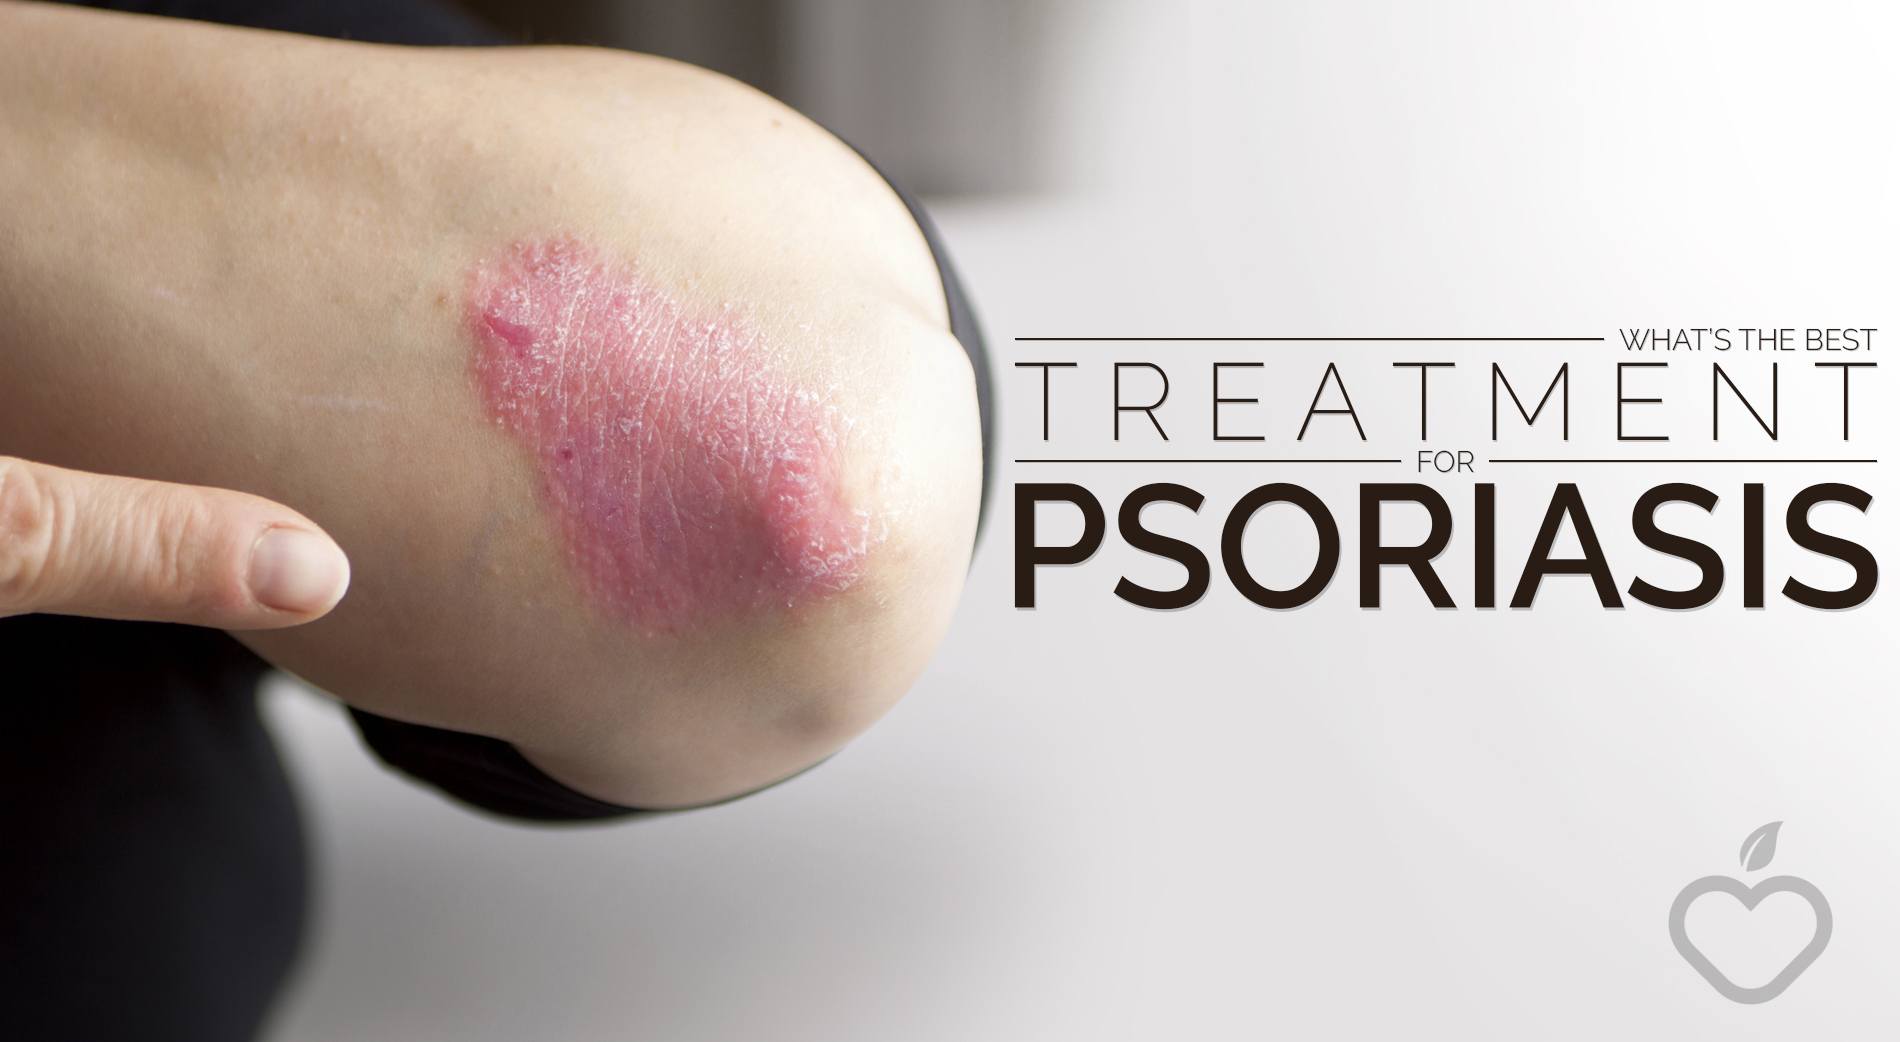 Whatâs The Best Treatment For Psoriasis